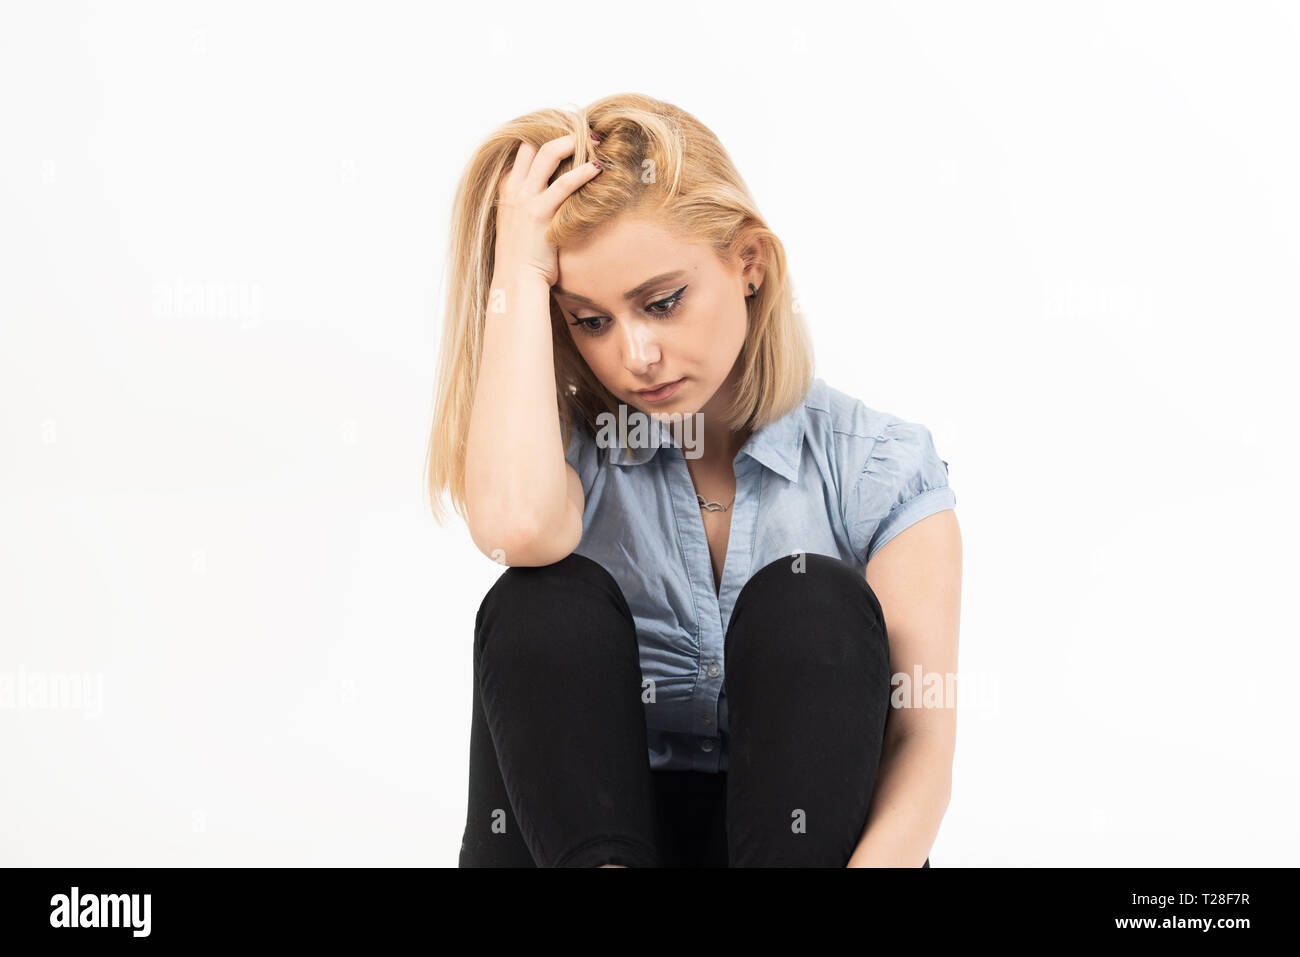 Sad And Depression Young Blonde Woman Isolated On White. Stock Photo